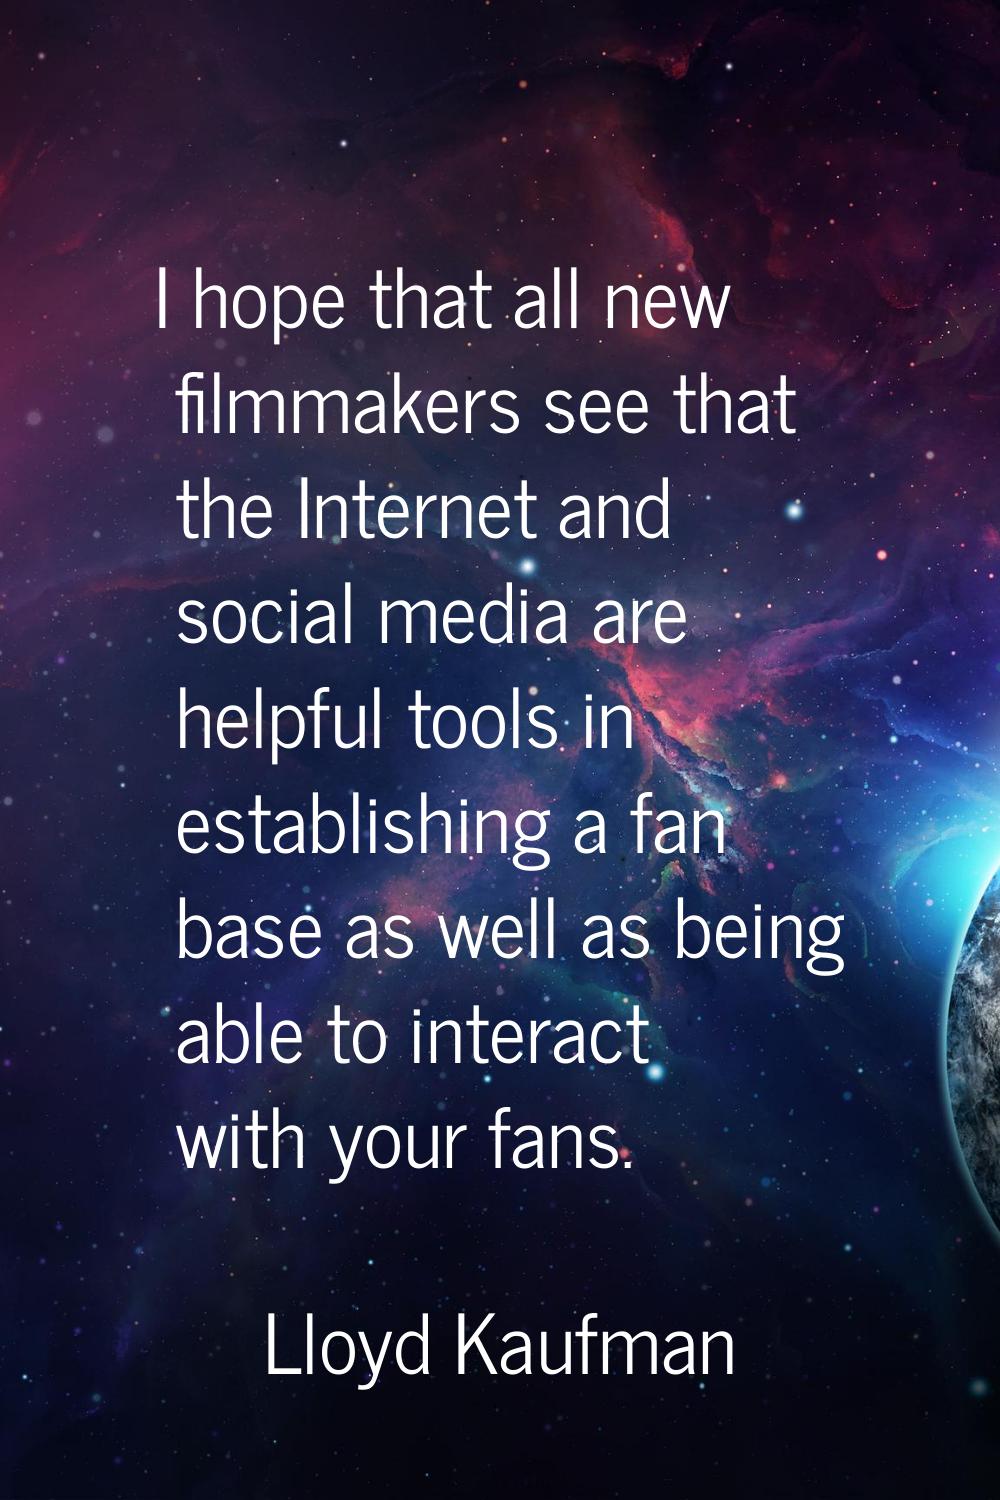 I hope that all new filmmakers see that the Internet and social media are helpful tools in establis